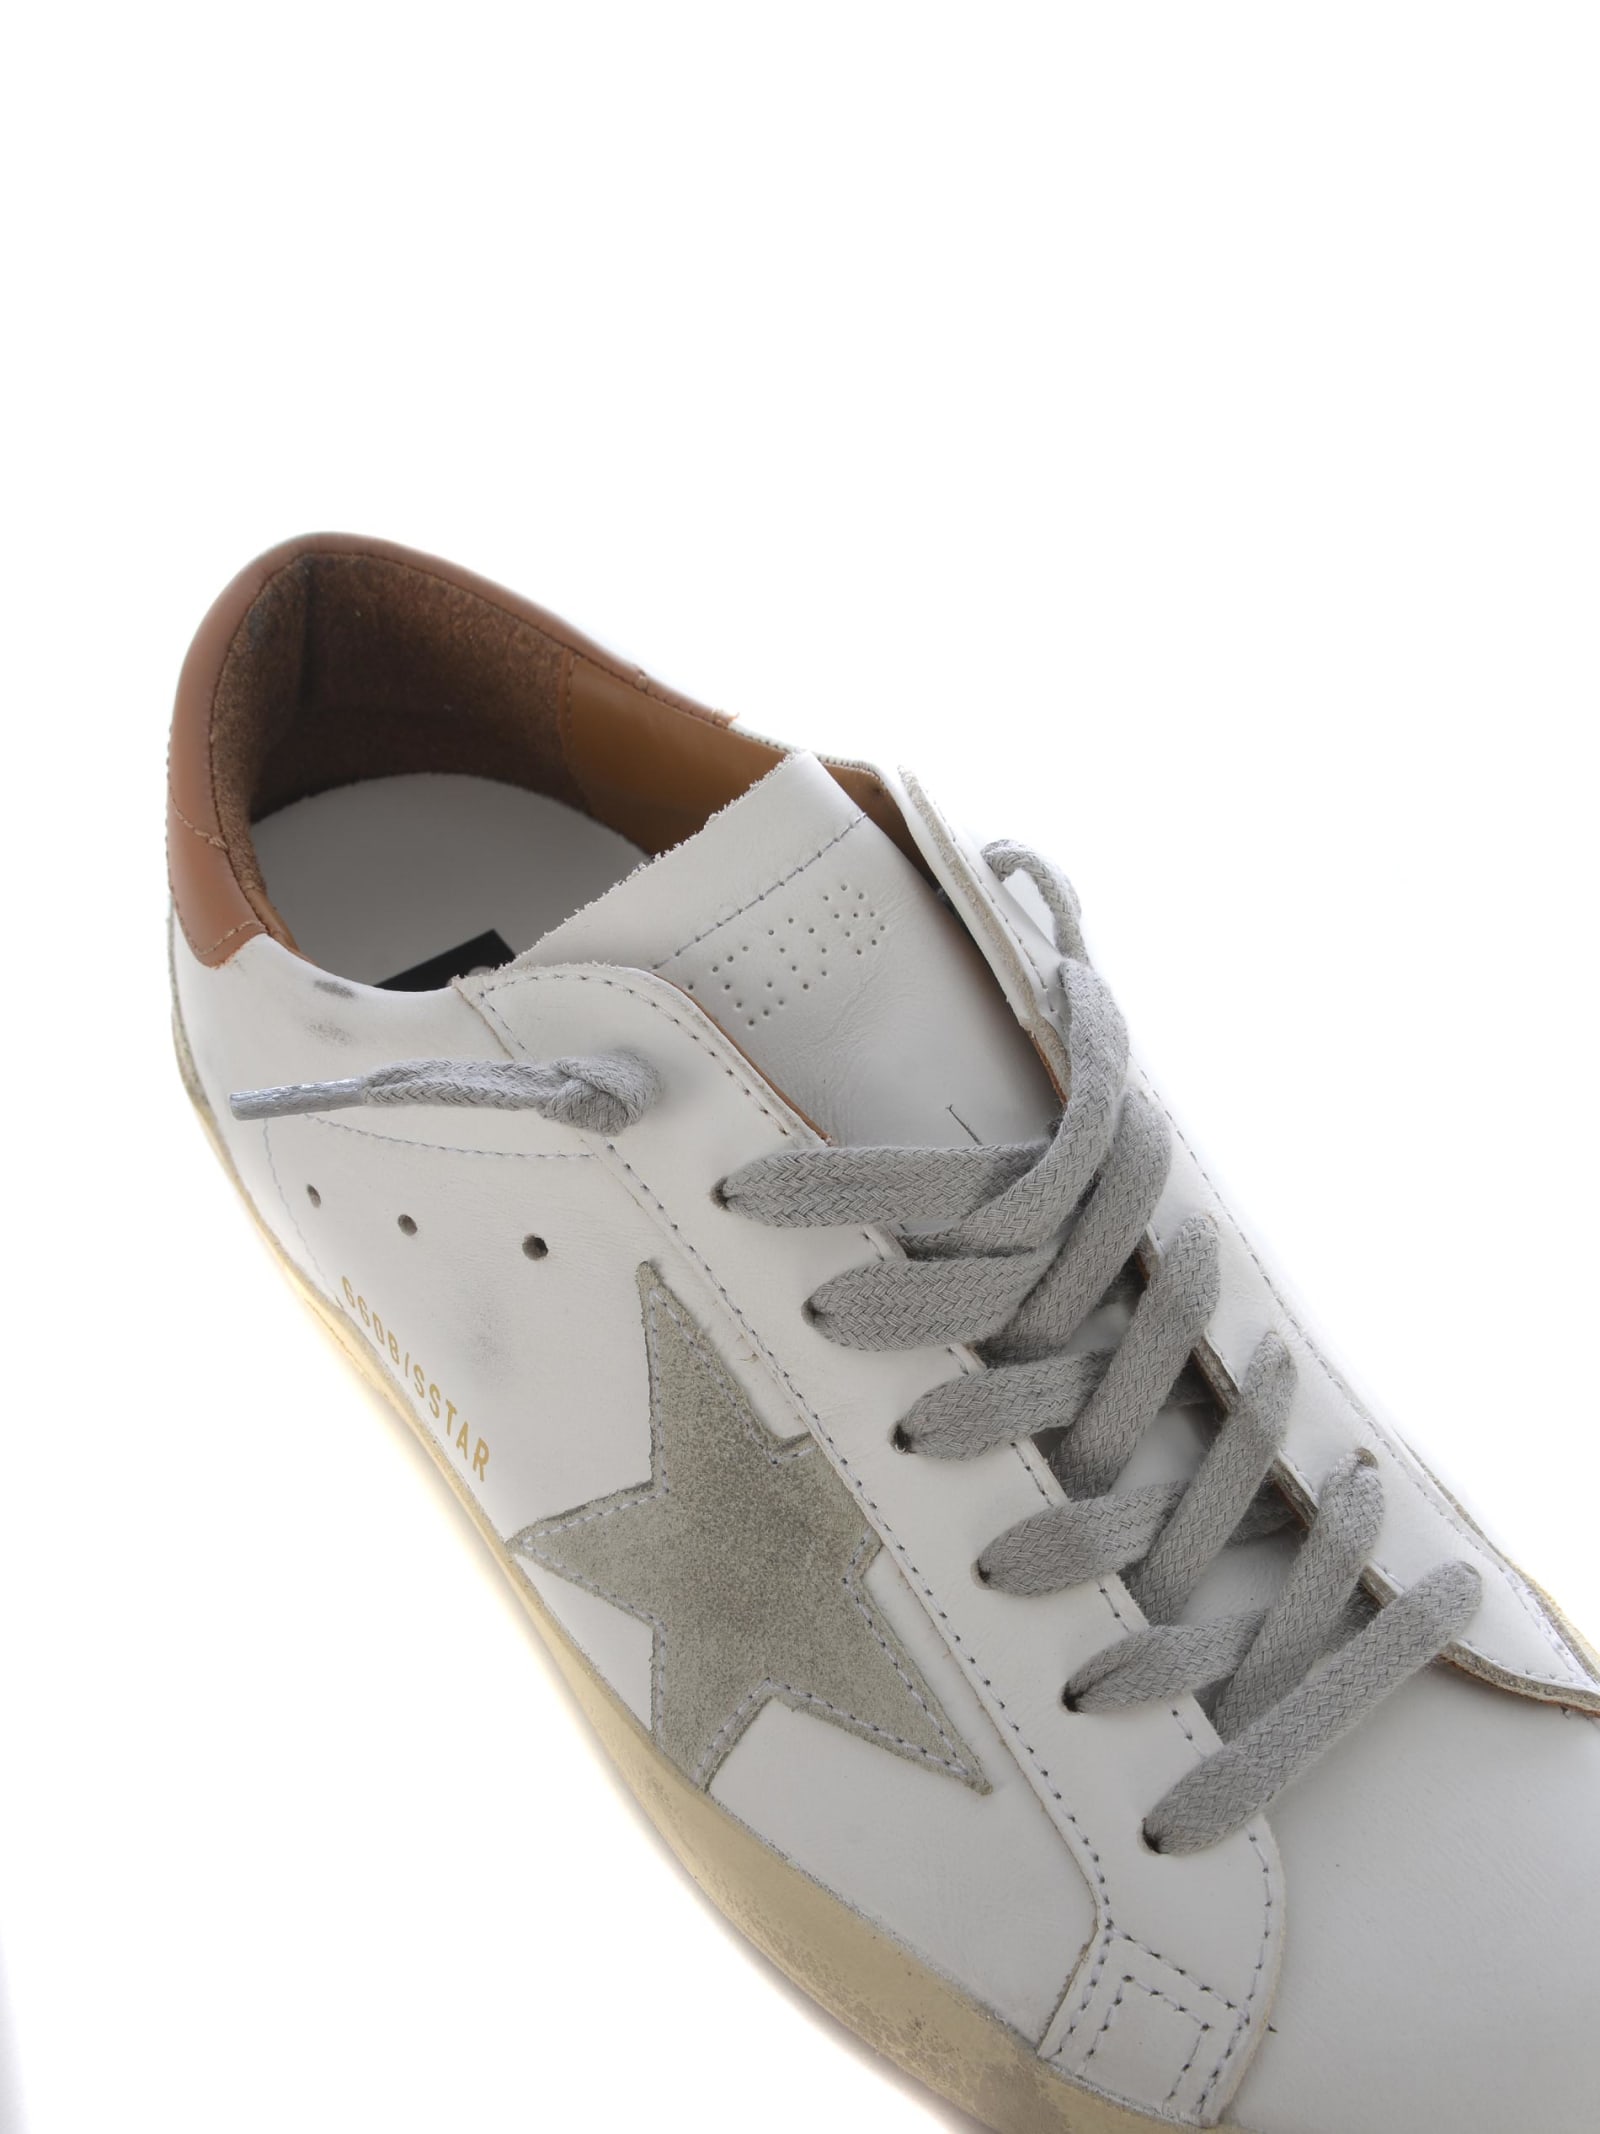 Shop Golden Goose Sneakers Golden Gooose Super Star Made Of Leather In Bianco